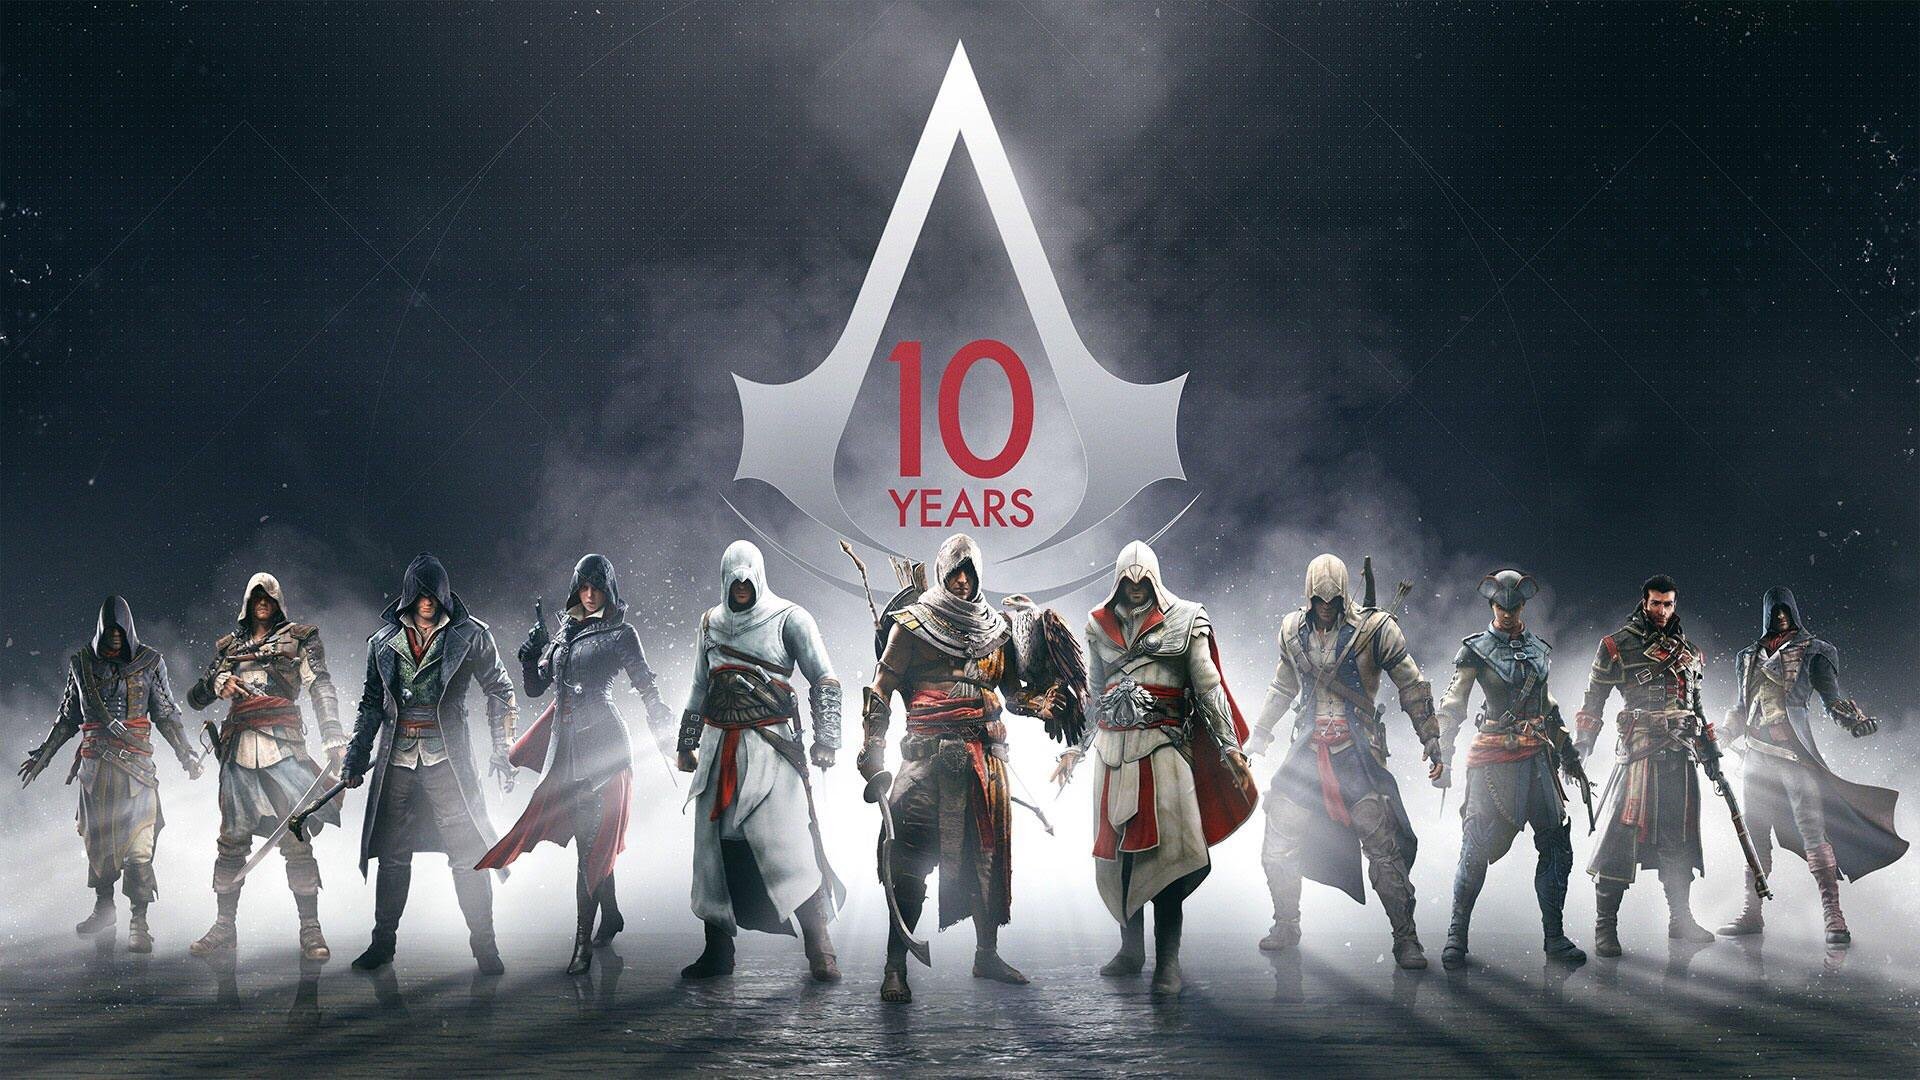 Assassins Creed 10 years, Assassin&039;s Creed, Ubisoft Wallpaper